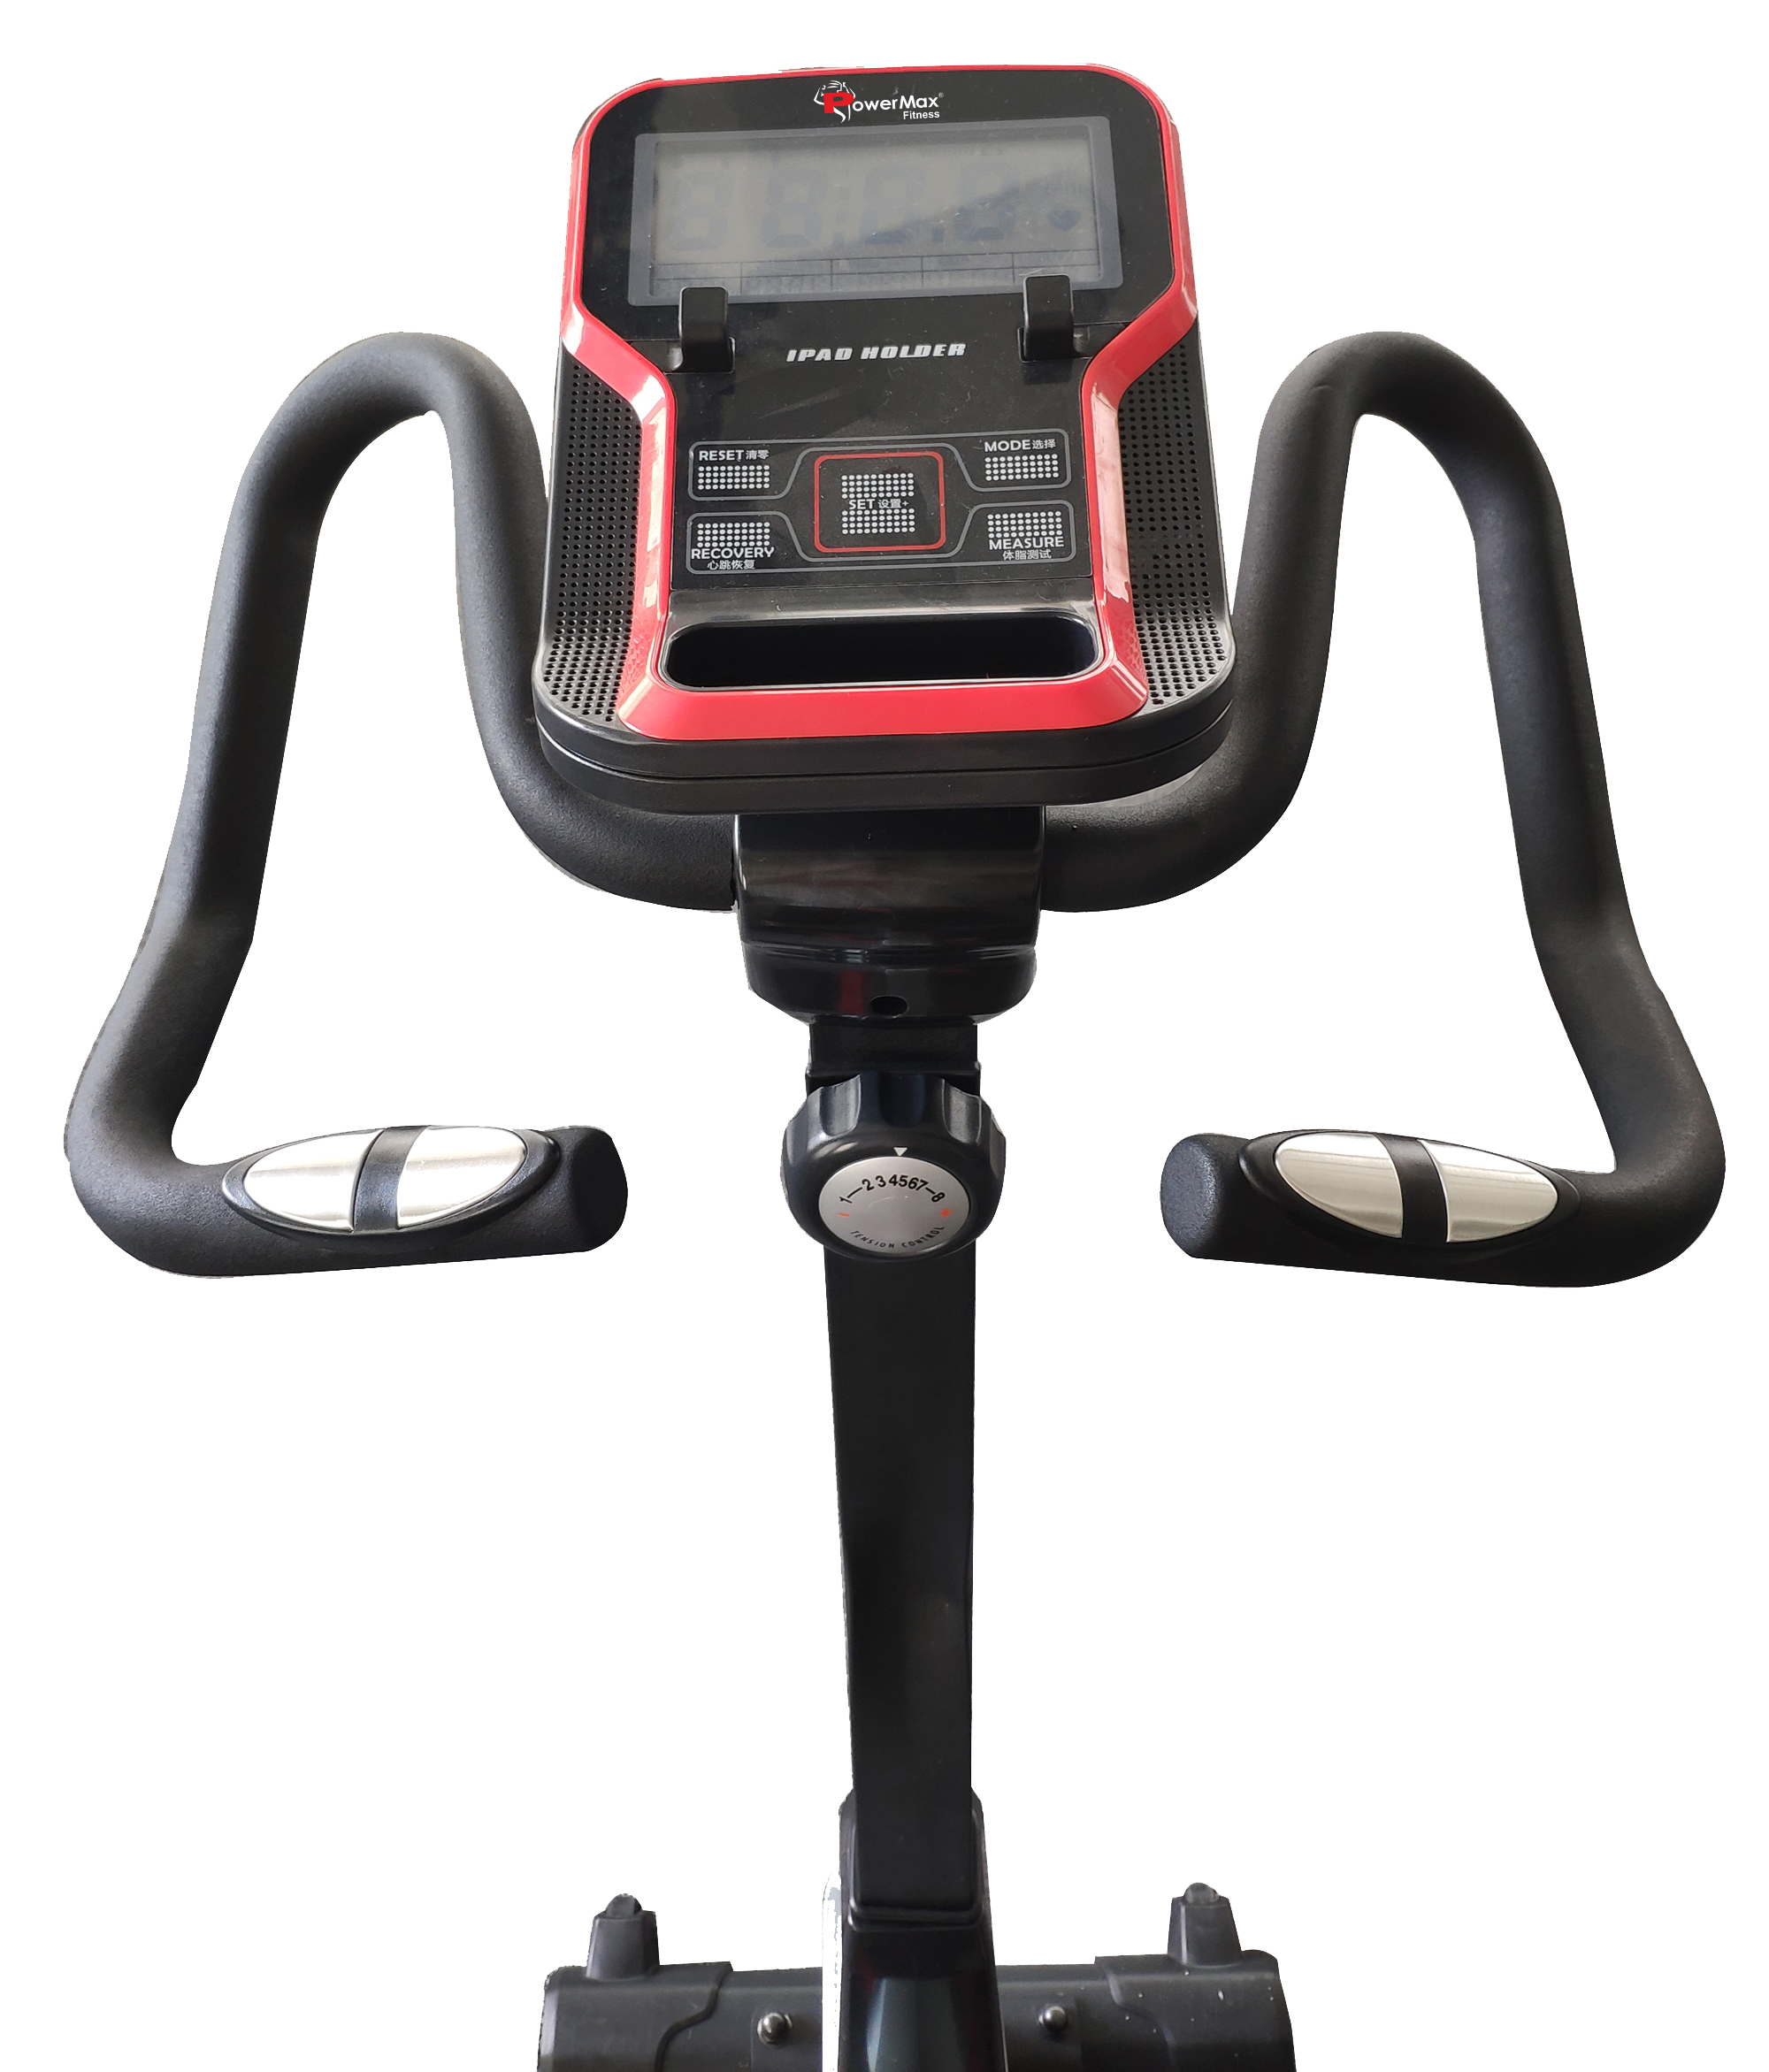 BU-650 Magnetic Upright Bike with LCD Display